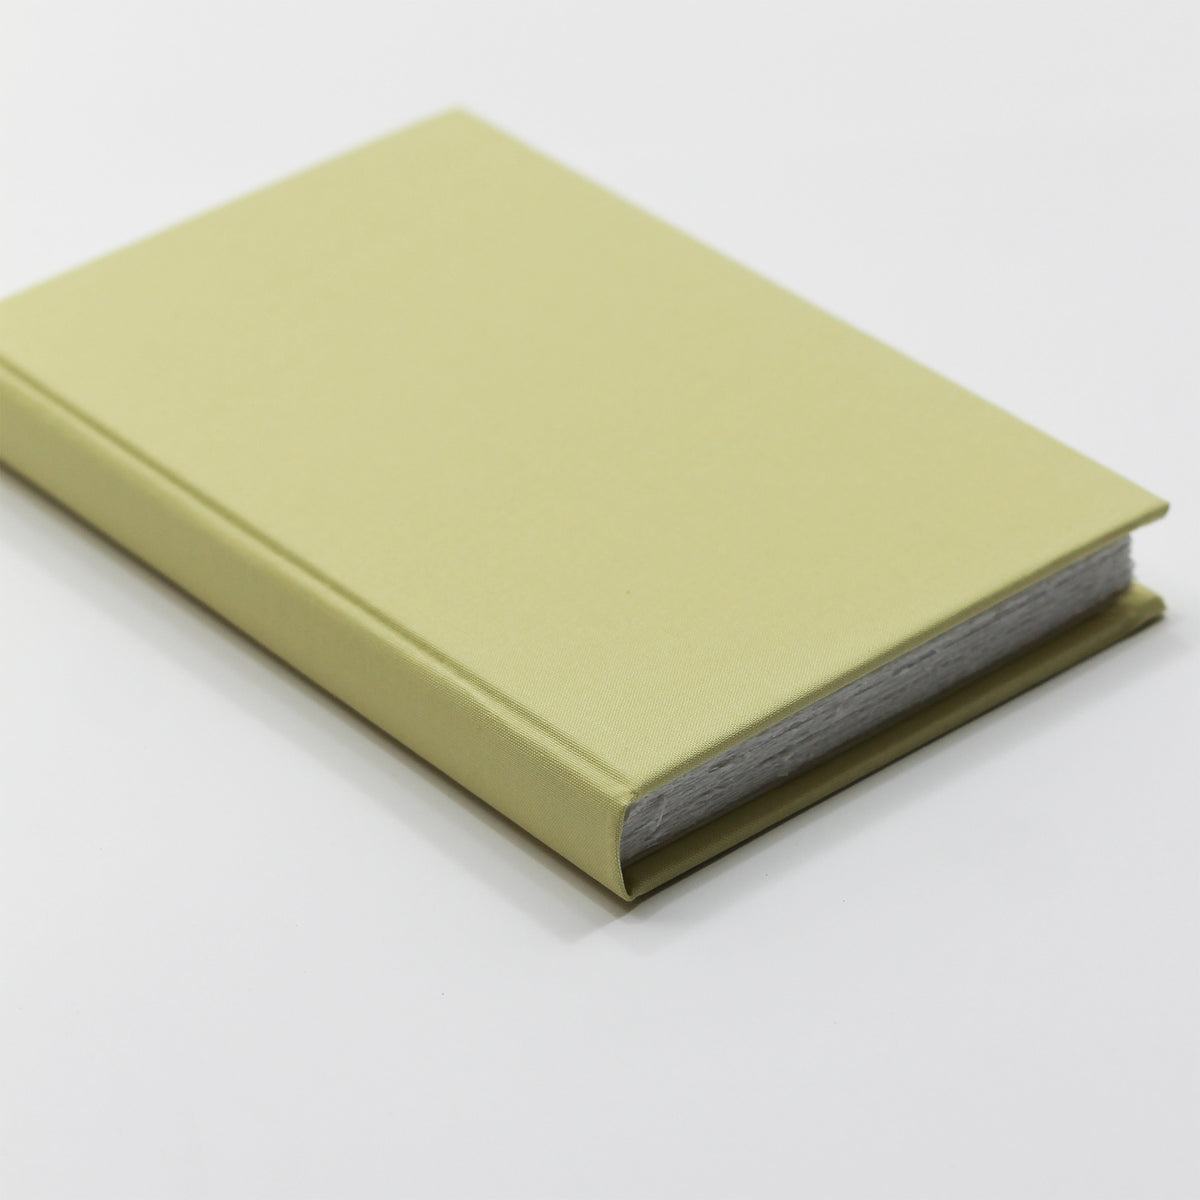 Medium Blank Page Journal with Celery Cotton Cover